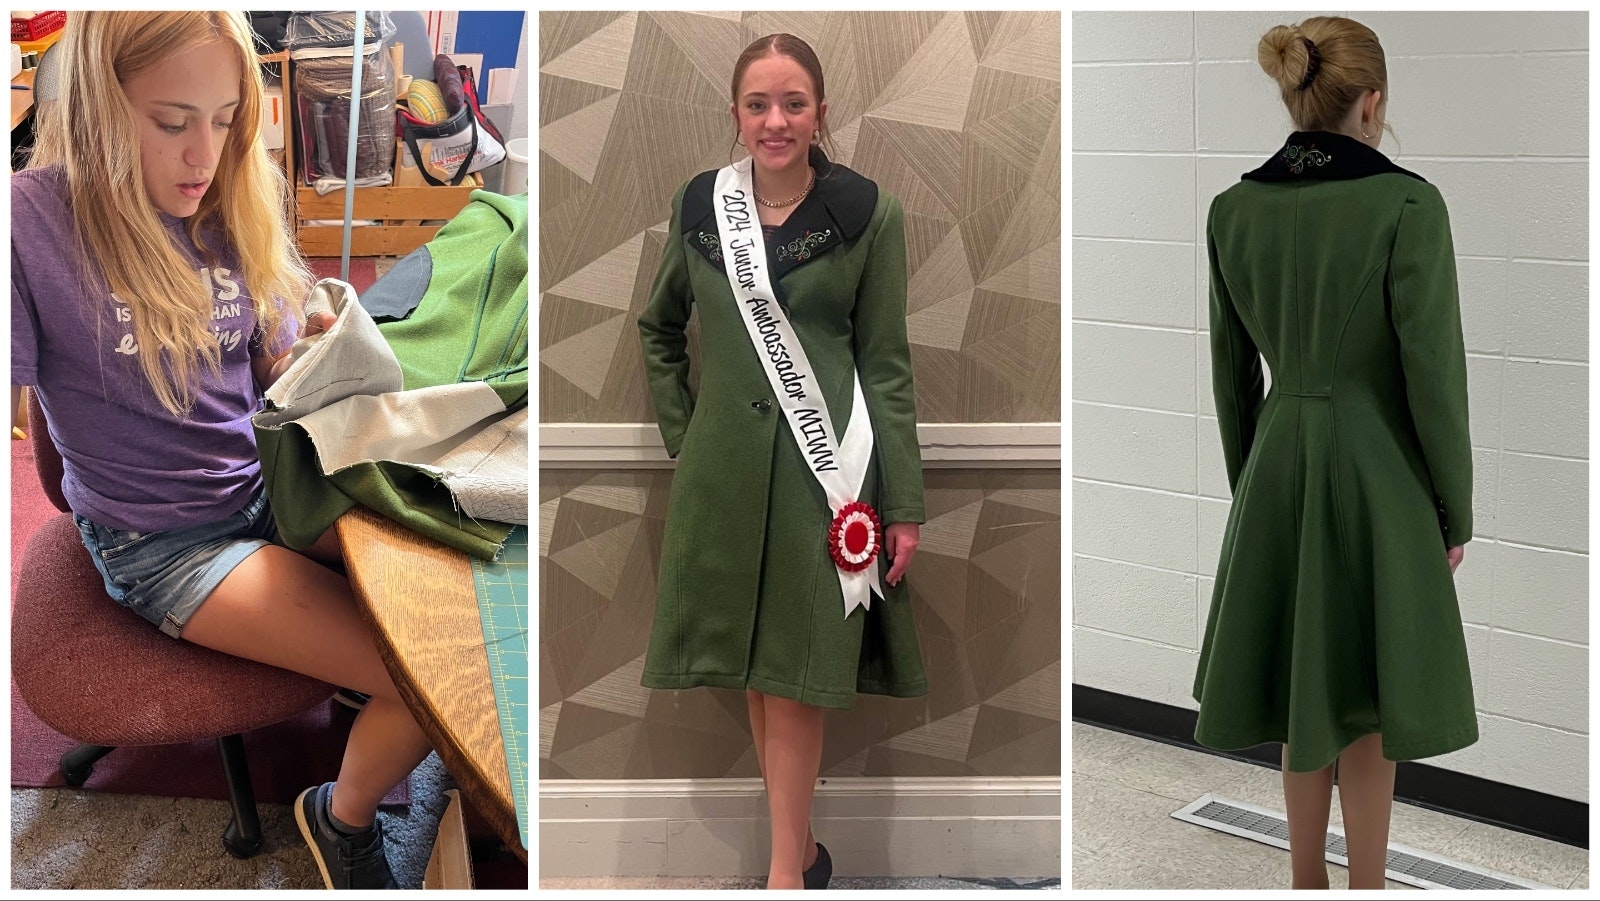 Carbon County 16-year-old Madi Dunning won the junior division of the National Make It With Wool competition with her stunning green coat.